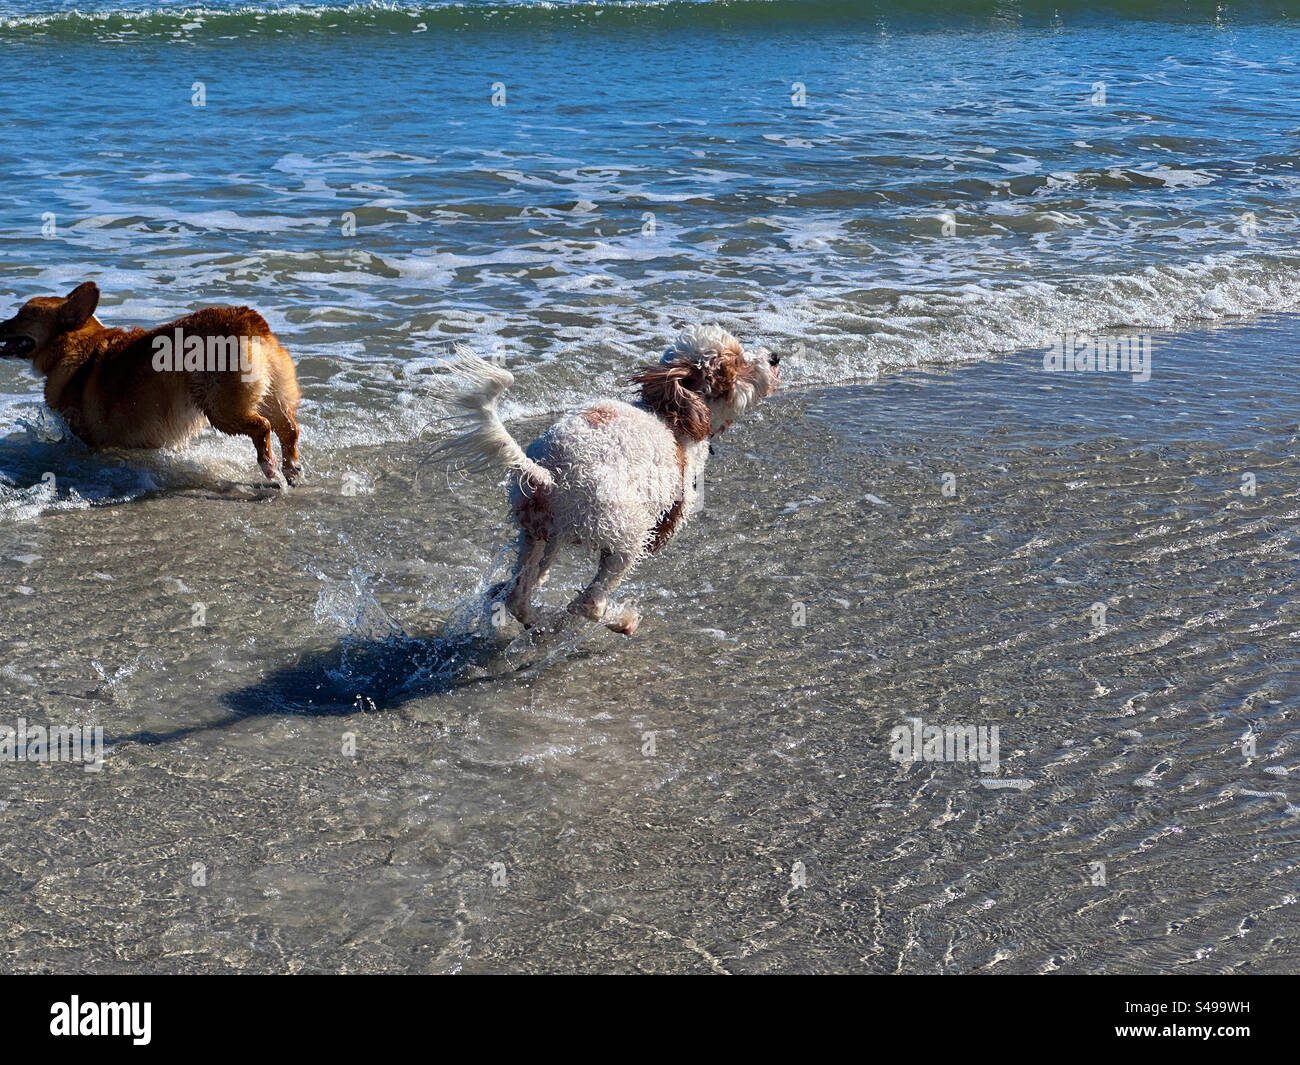 Two dogs playing in the water at Jacksonville Beach, Florida, USA. Stock Photo